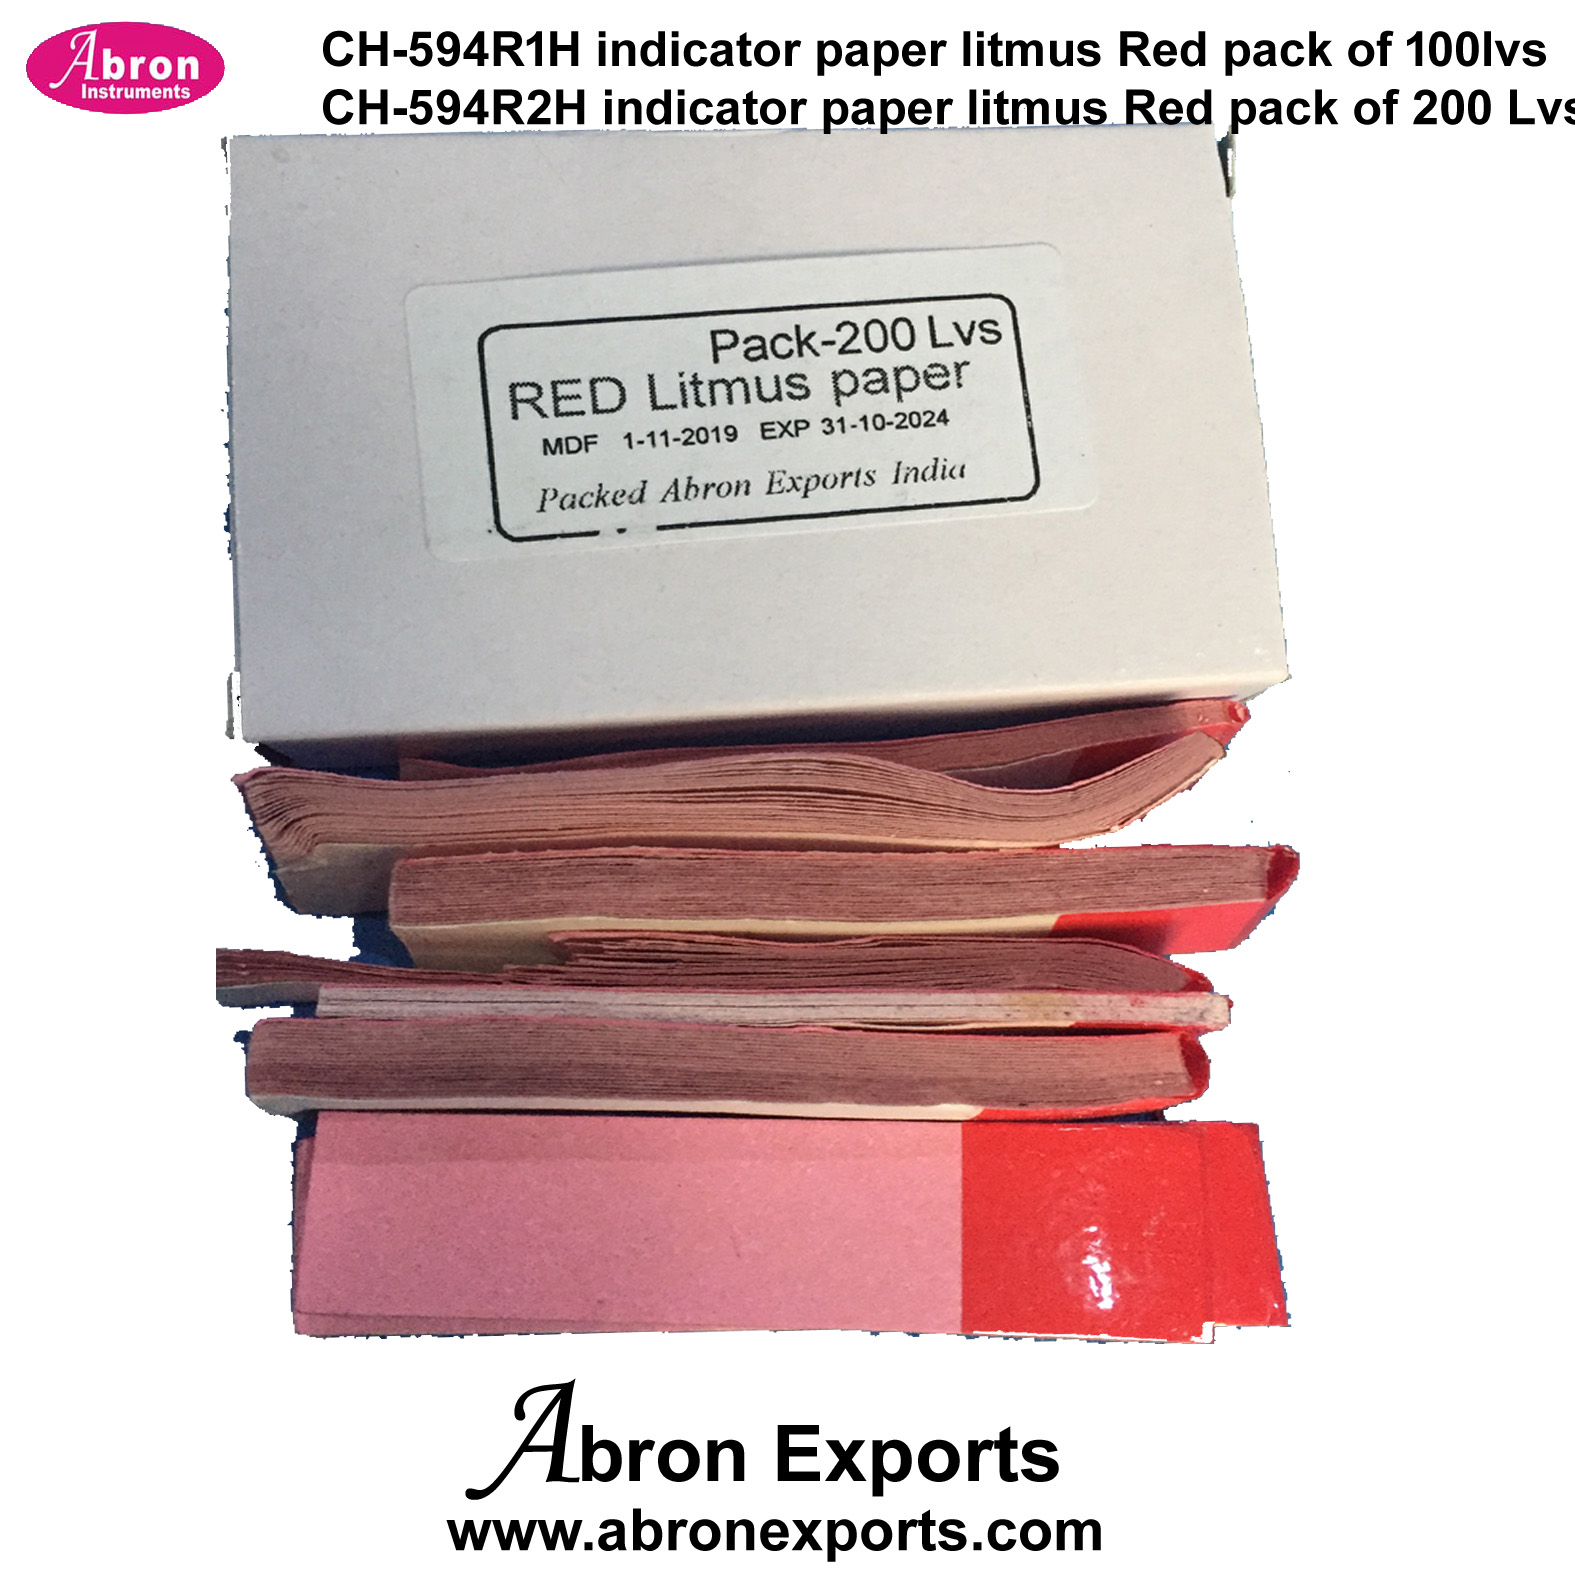 Litmus Red Indicator Papers Red to Blue in Acid Abron ch-595-100 Lvs Box of 10 Packs of 100 leaves CH-594B1H 